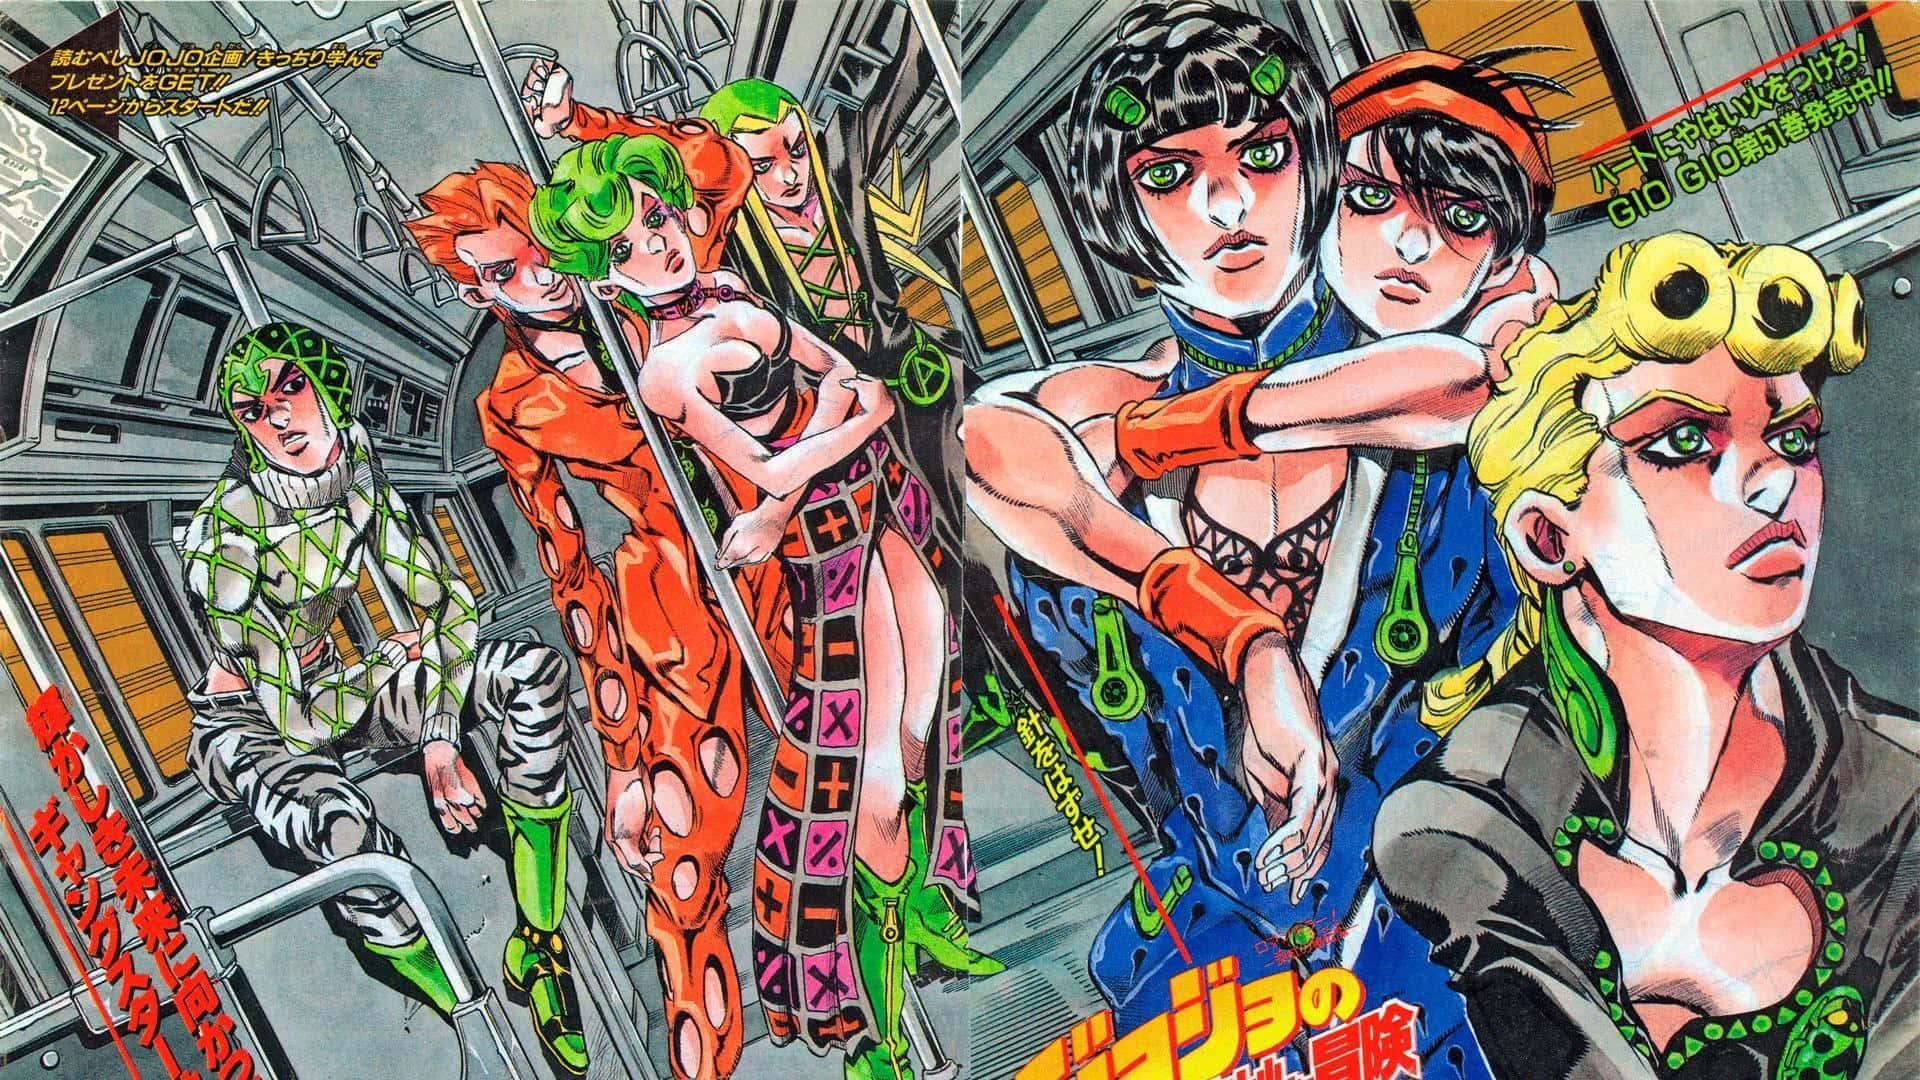 Jotaro and Dio, Two Rivals at the Center of the Legendary Jojo Manga Wallpaper